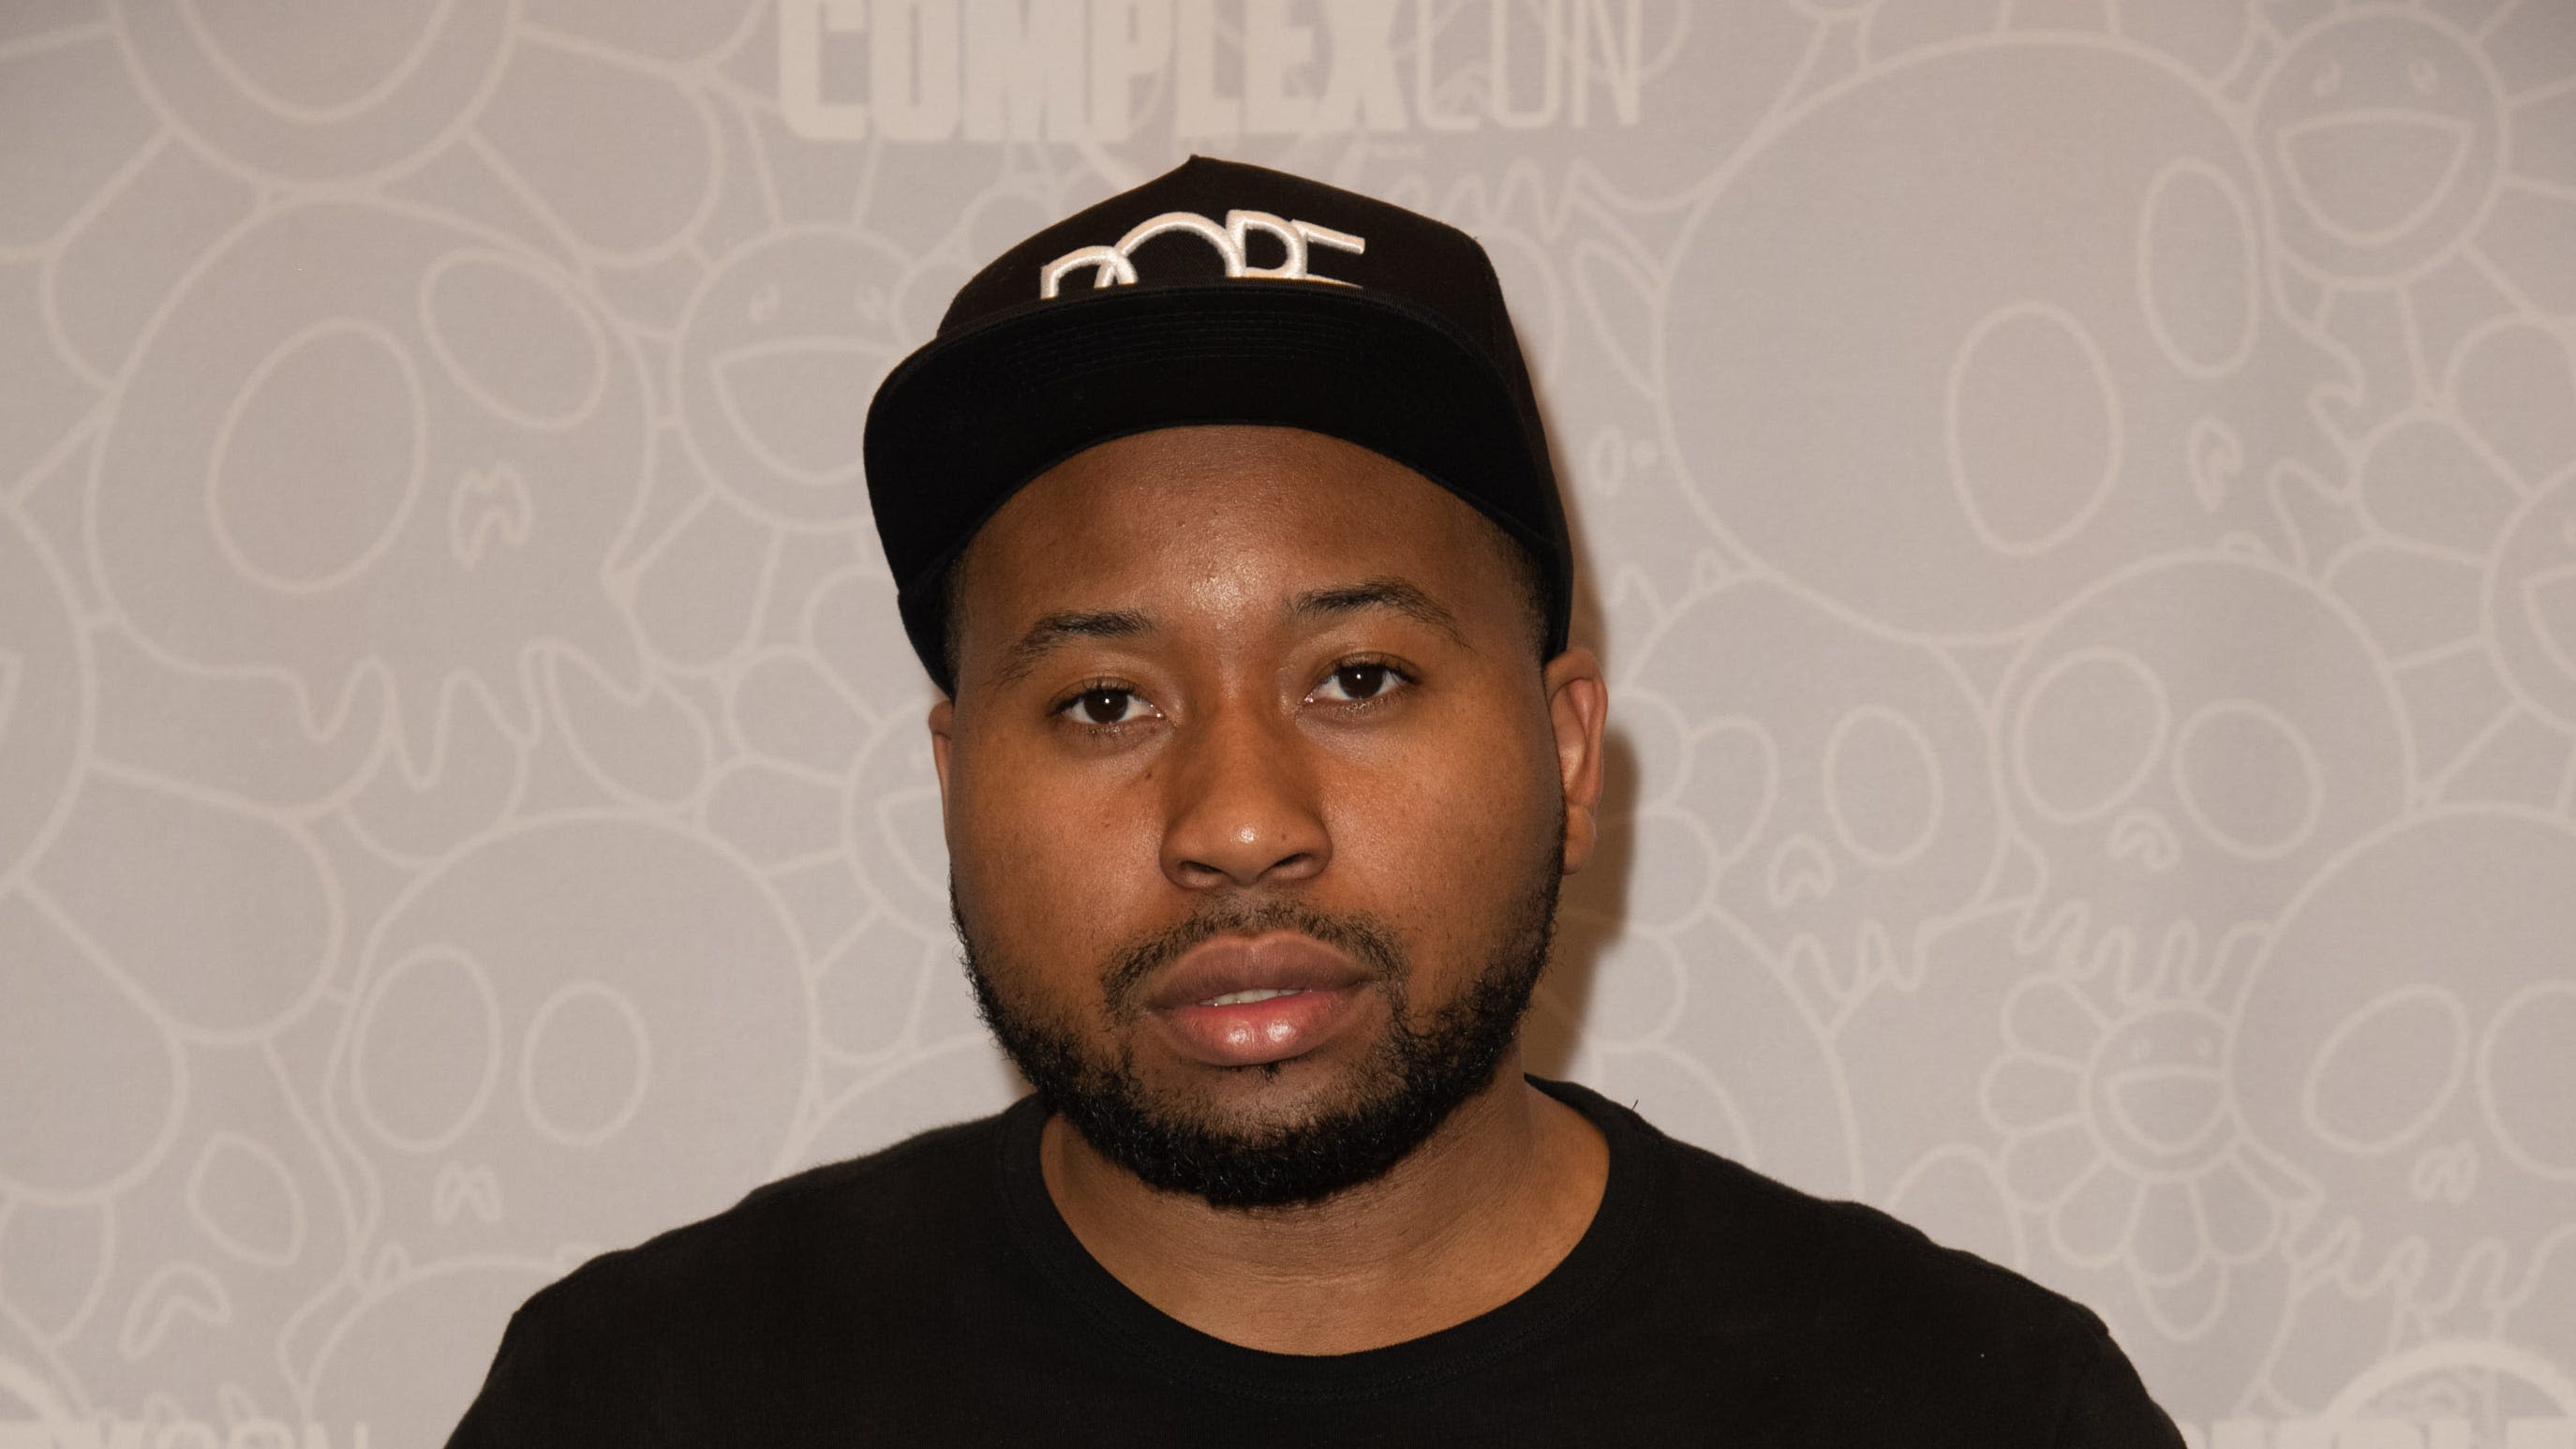 DJ Akademiks, Off The Record podcast host, accused of rape and defamation